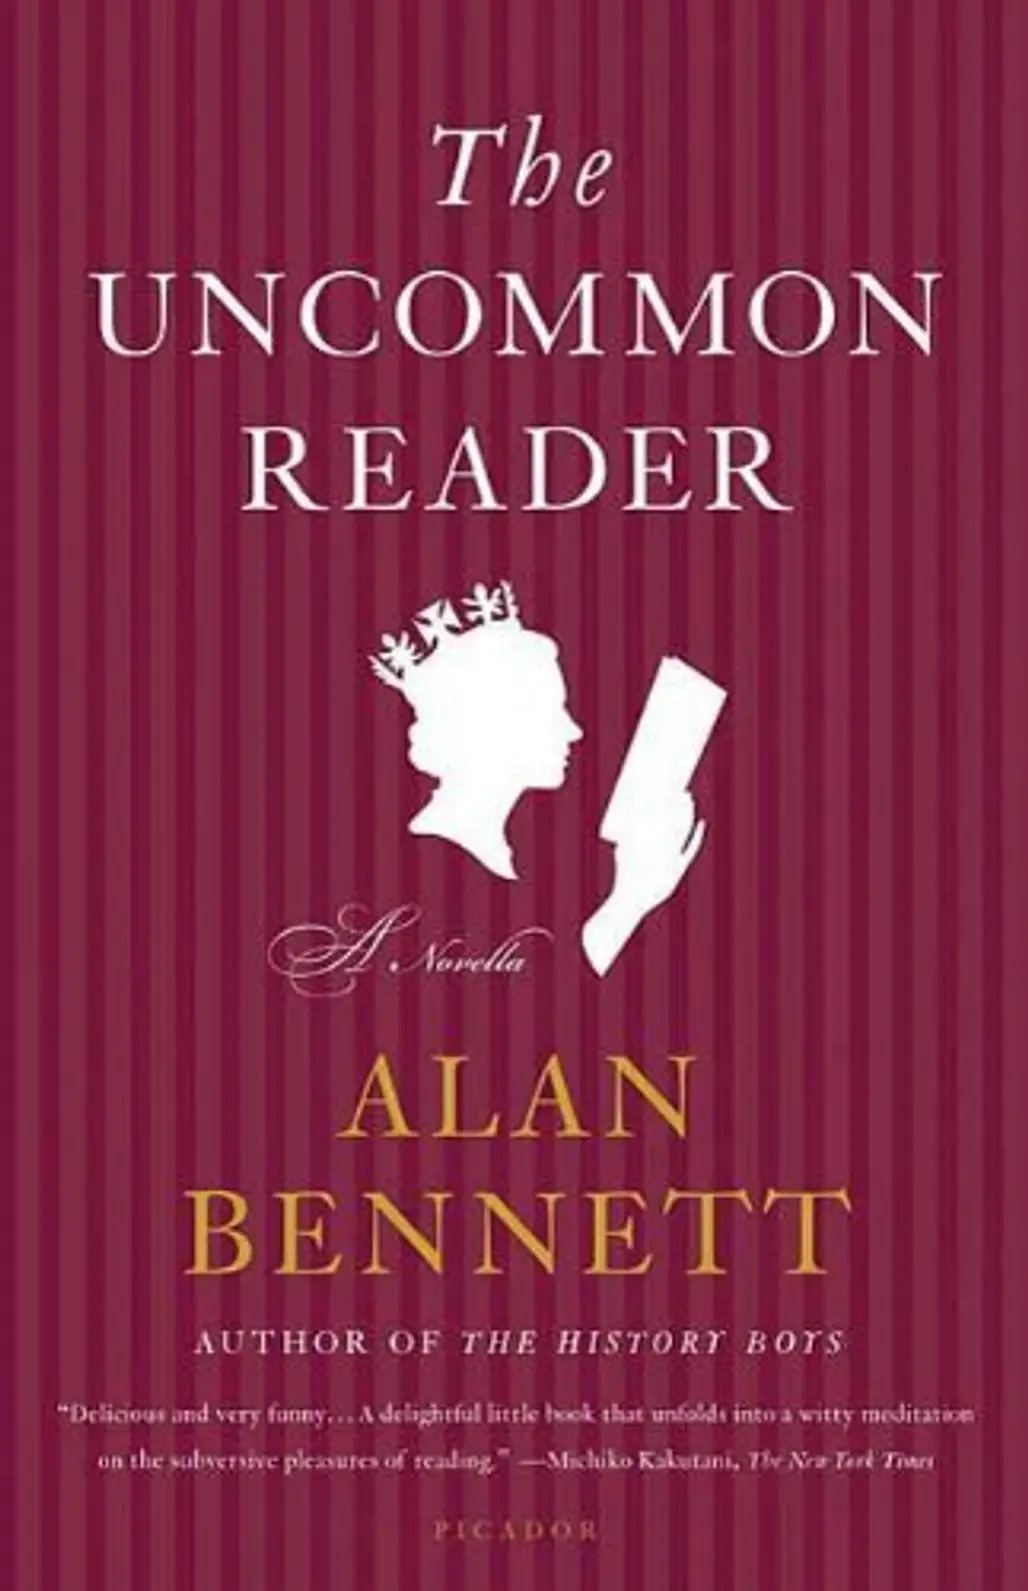 'the Uncommon Reader' by Alan Bennett